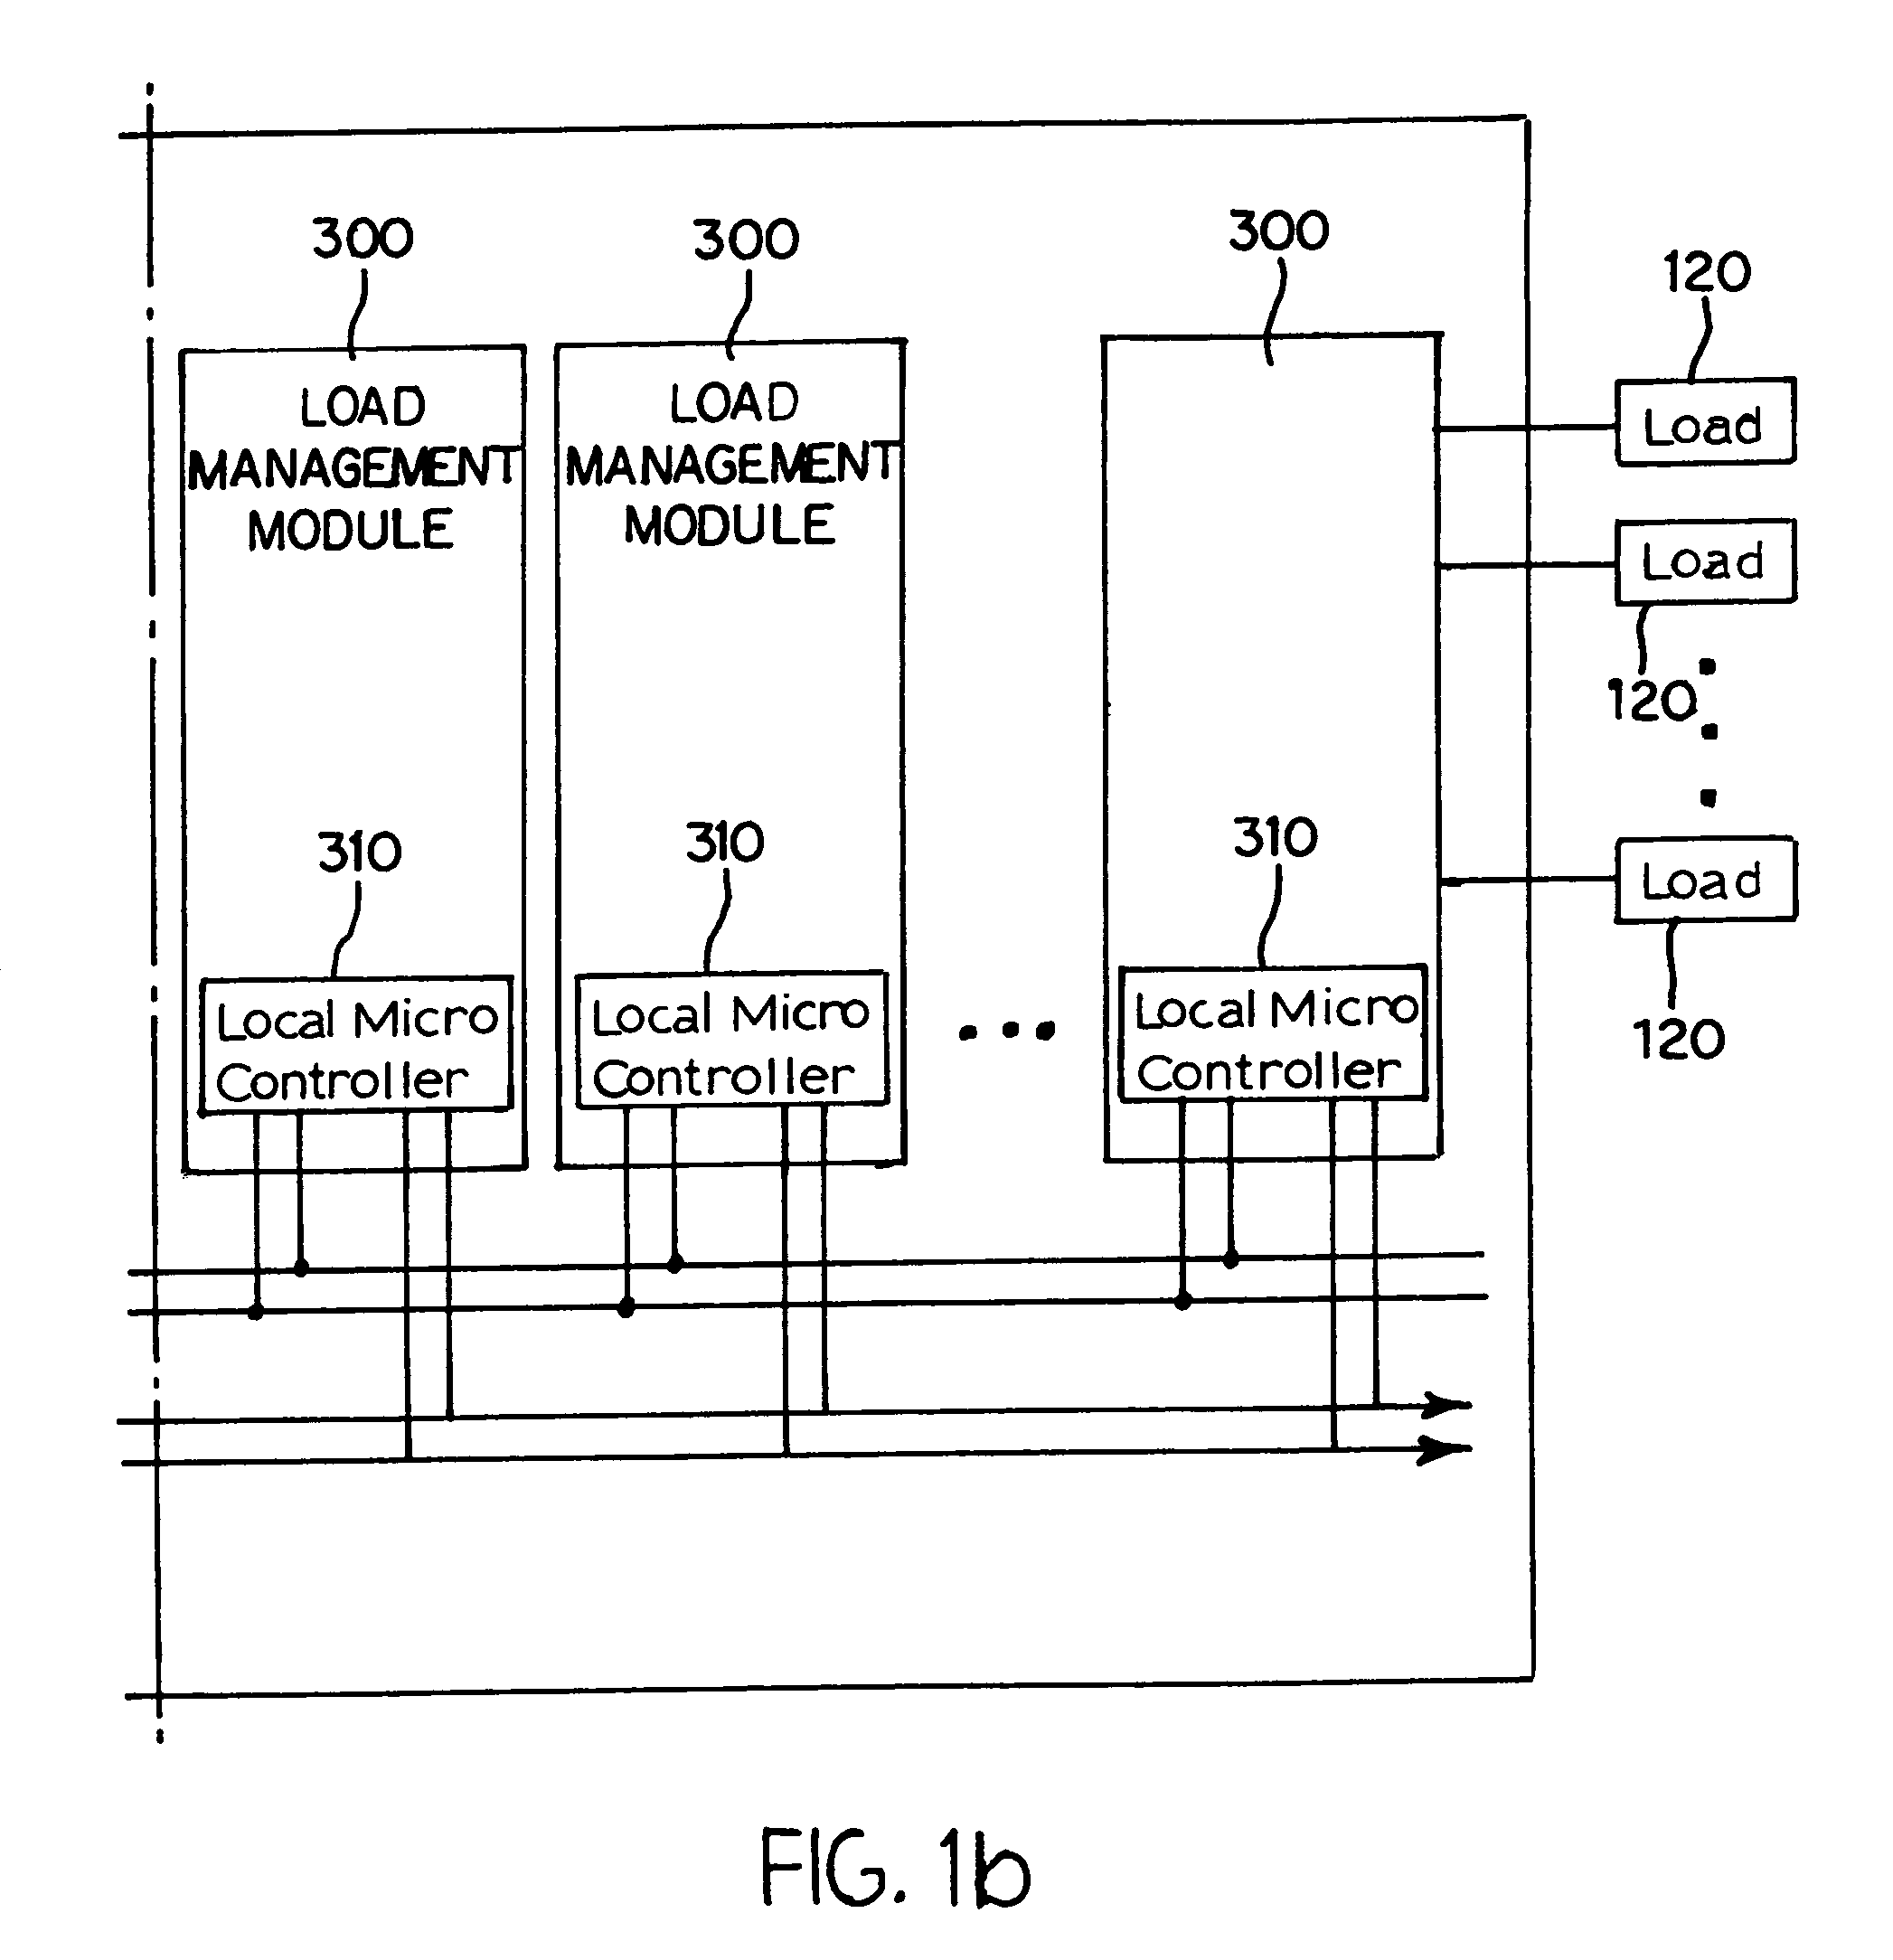 Electric load management center including gateway module and multiple load management modules for distributing power to multiple loads